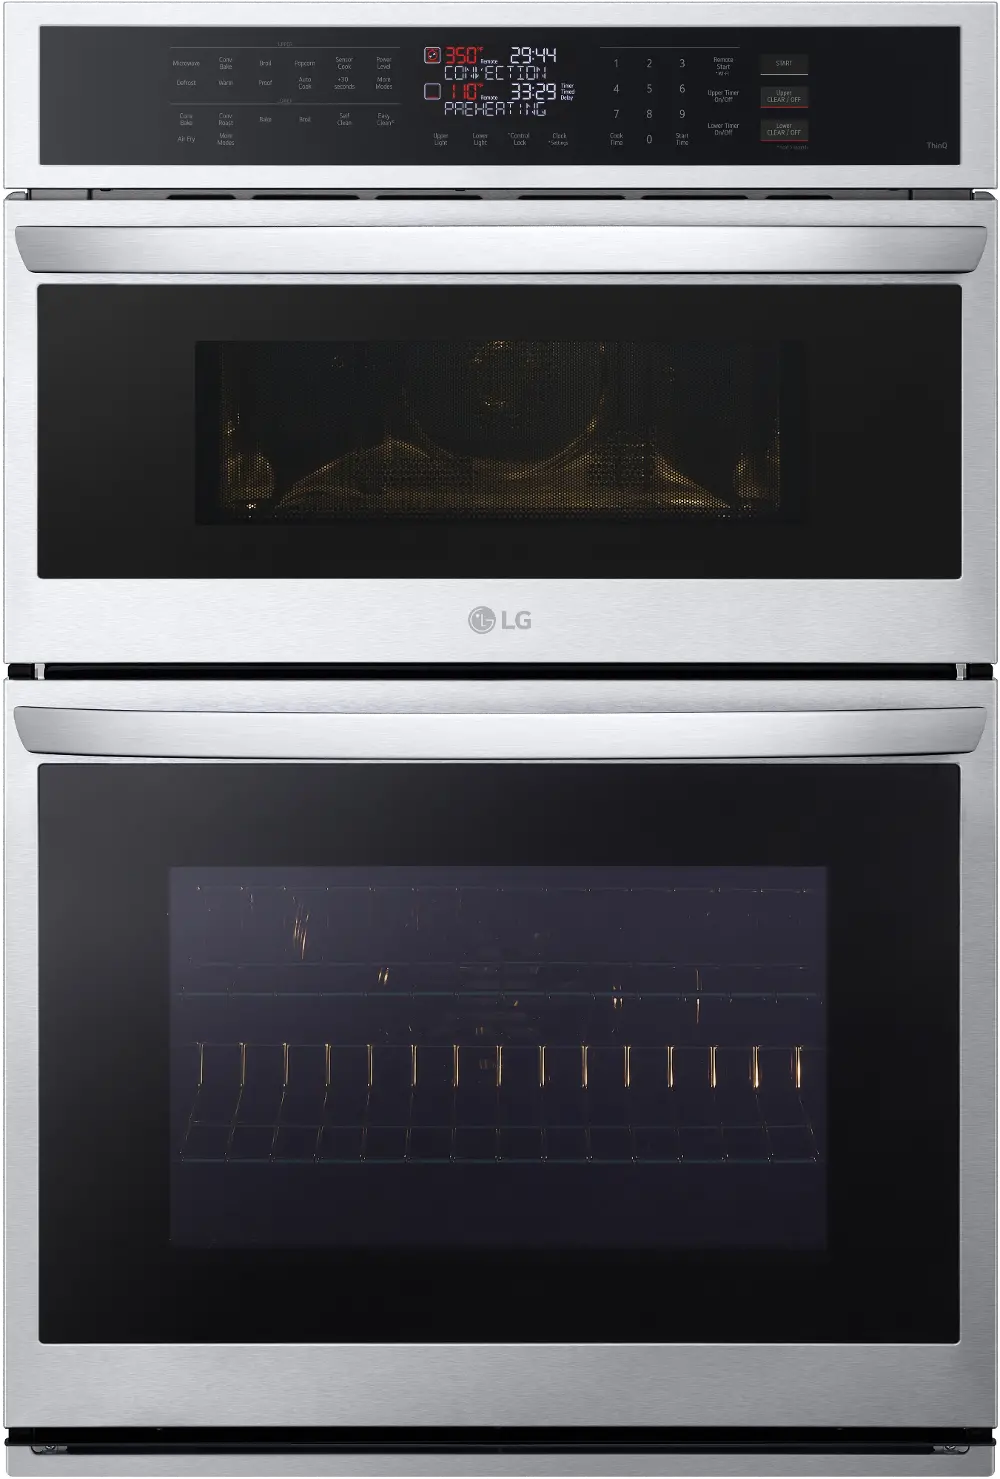 WCEP6423F LG 6.4 cu ft Combination Wall Oven - Stainless Steel 30 Inch-1